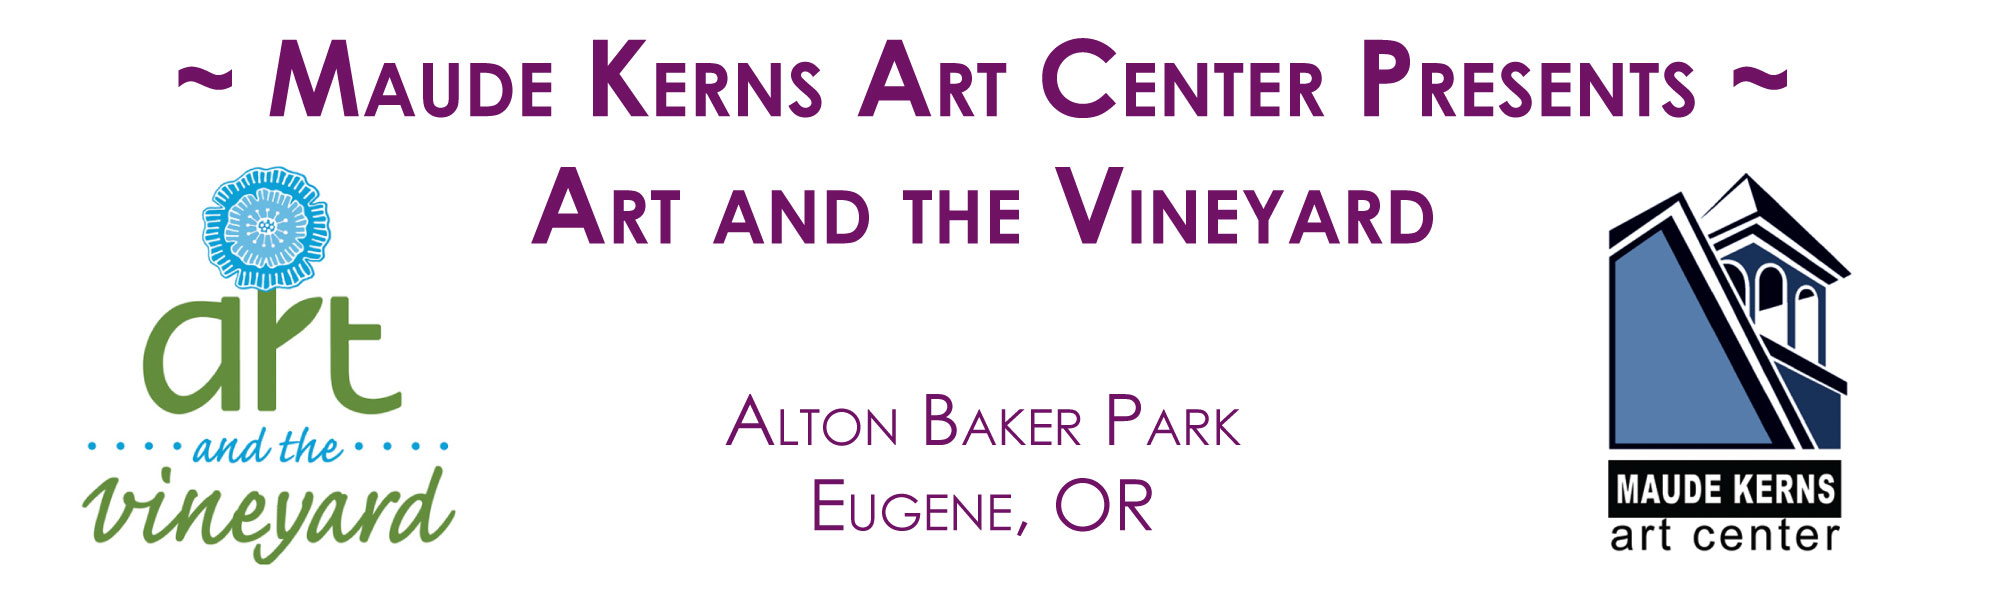 2017 Art and The Vineyard